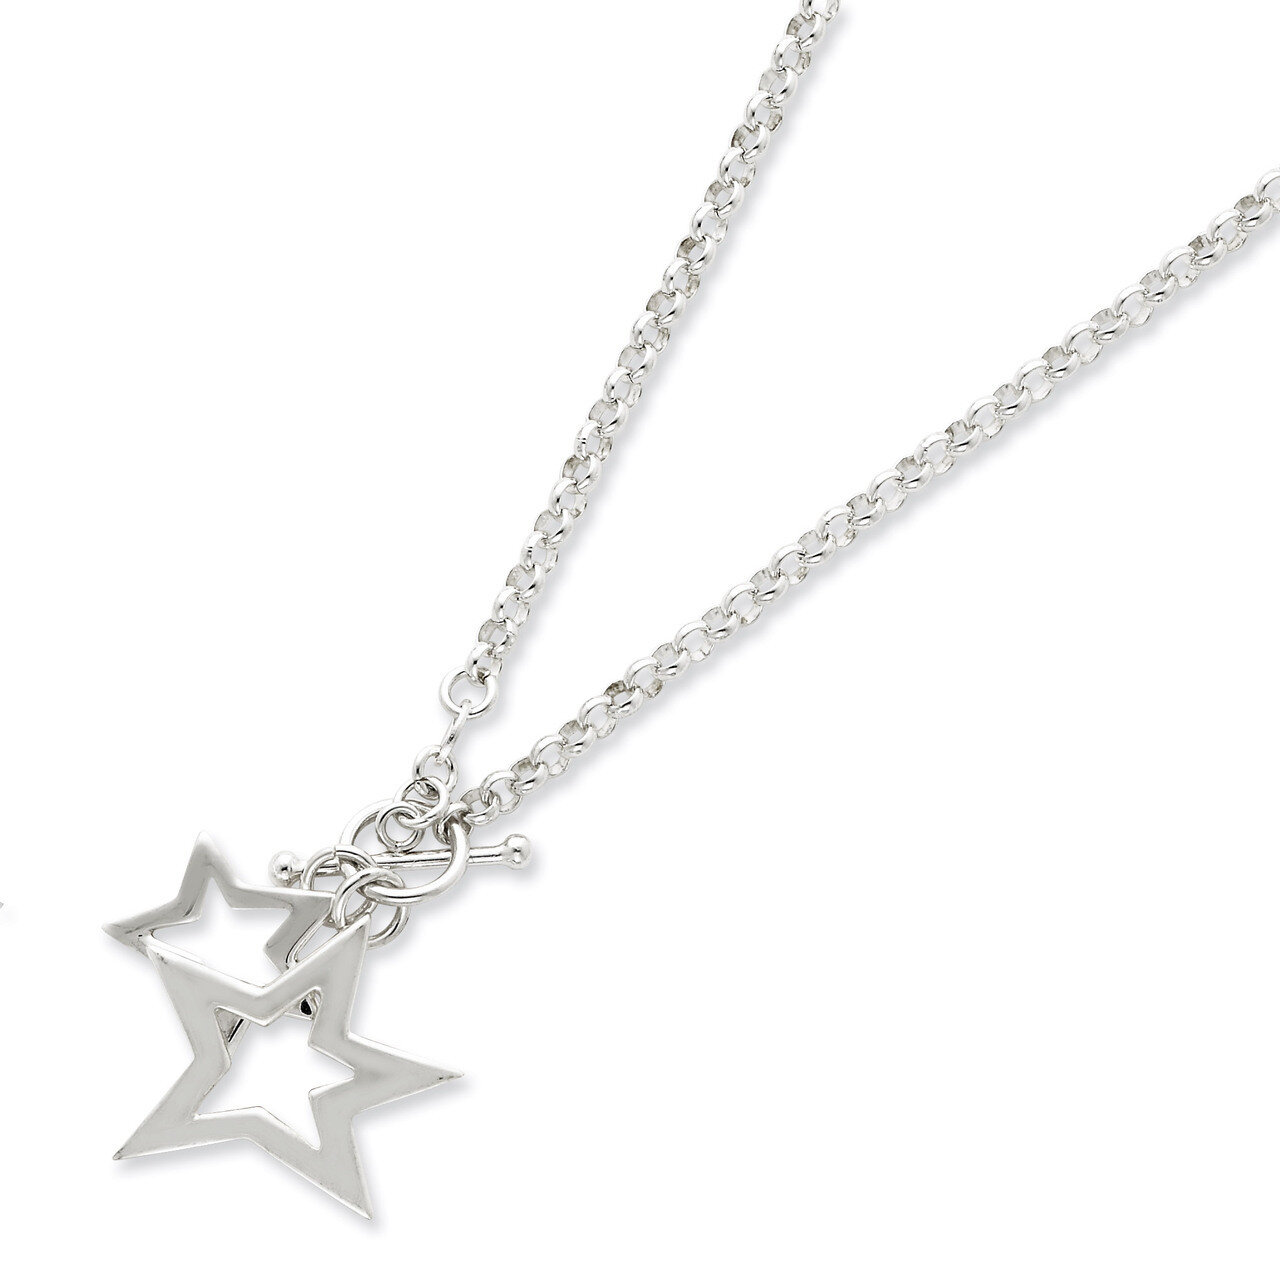 16 Inch Stars Necklace Sterling Silver Fancy QG2472-16